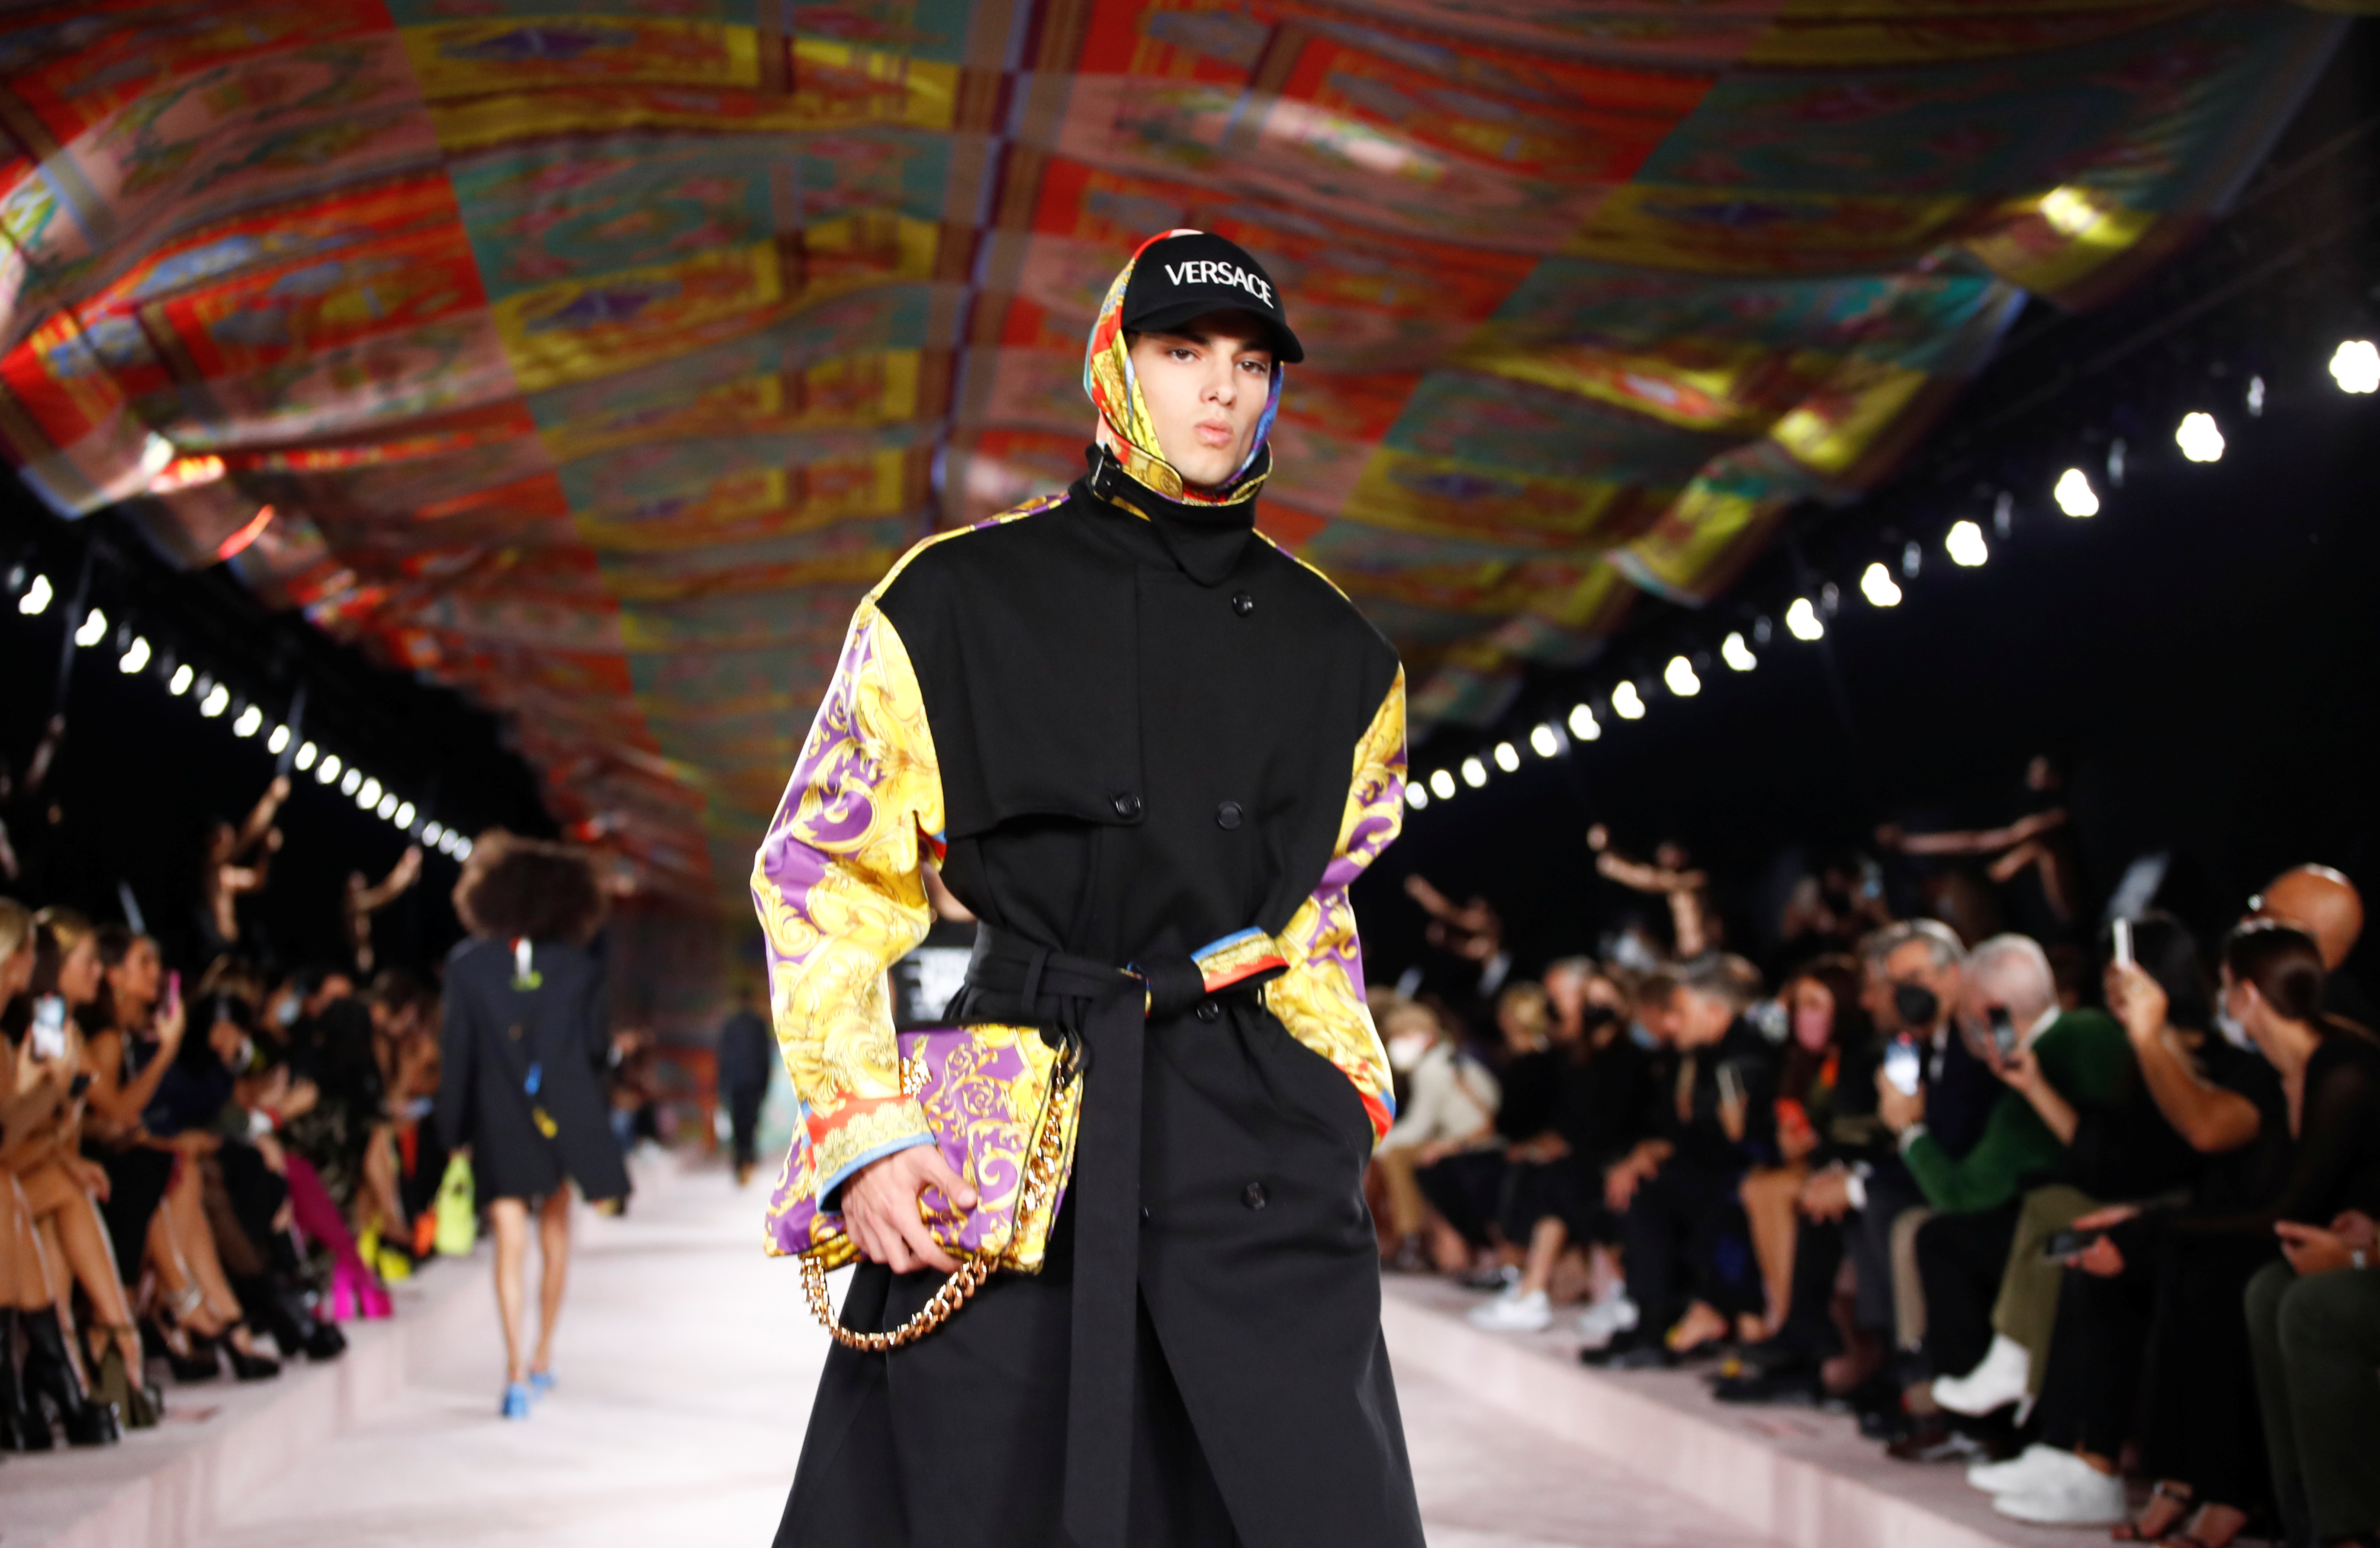 Versace presents its Spring/Summer 2022 collection during Milan Fashion Week